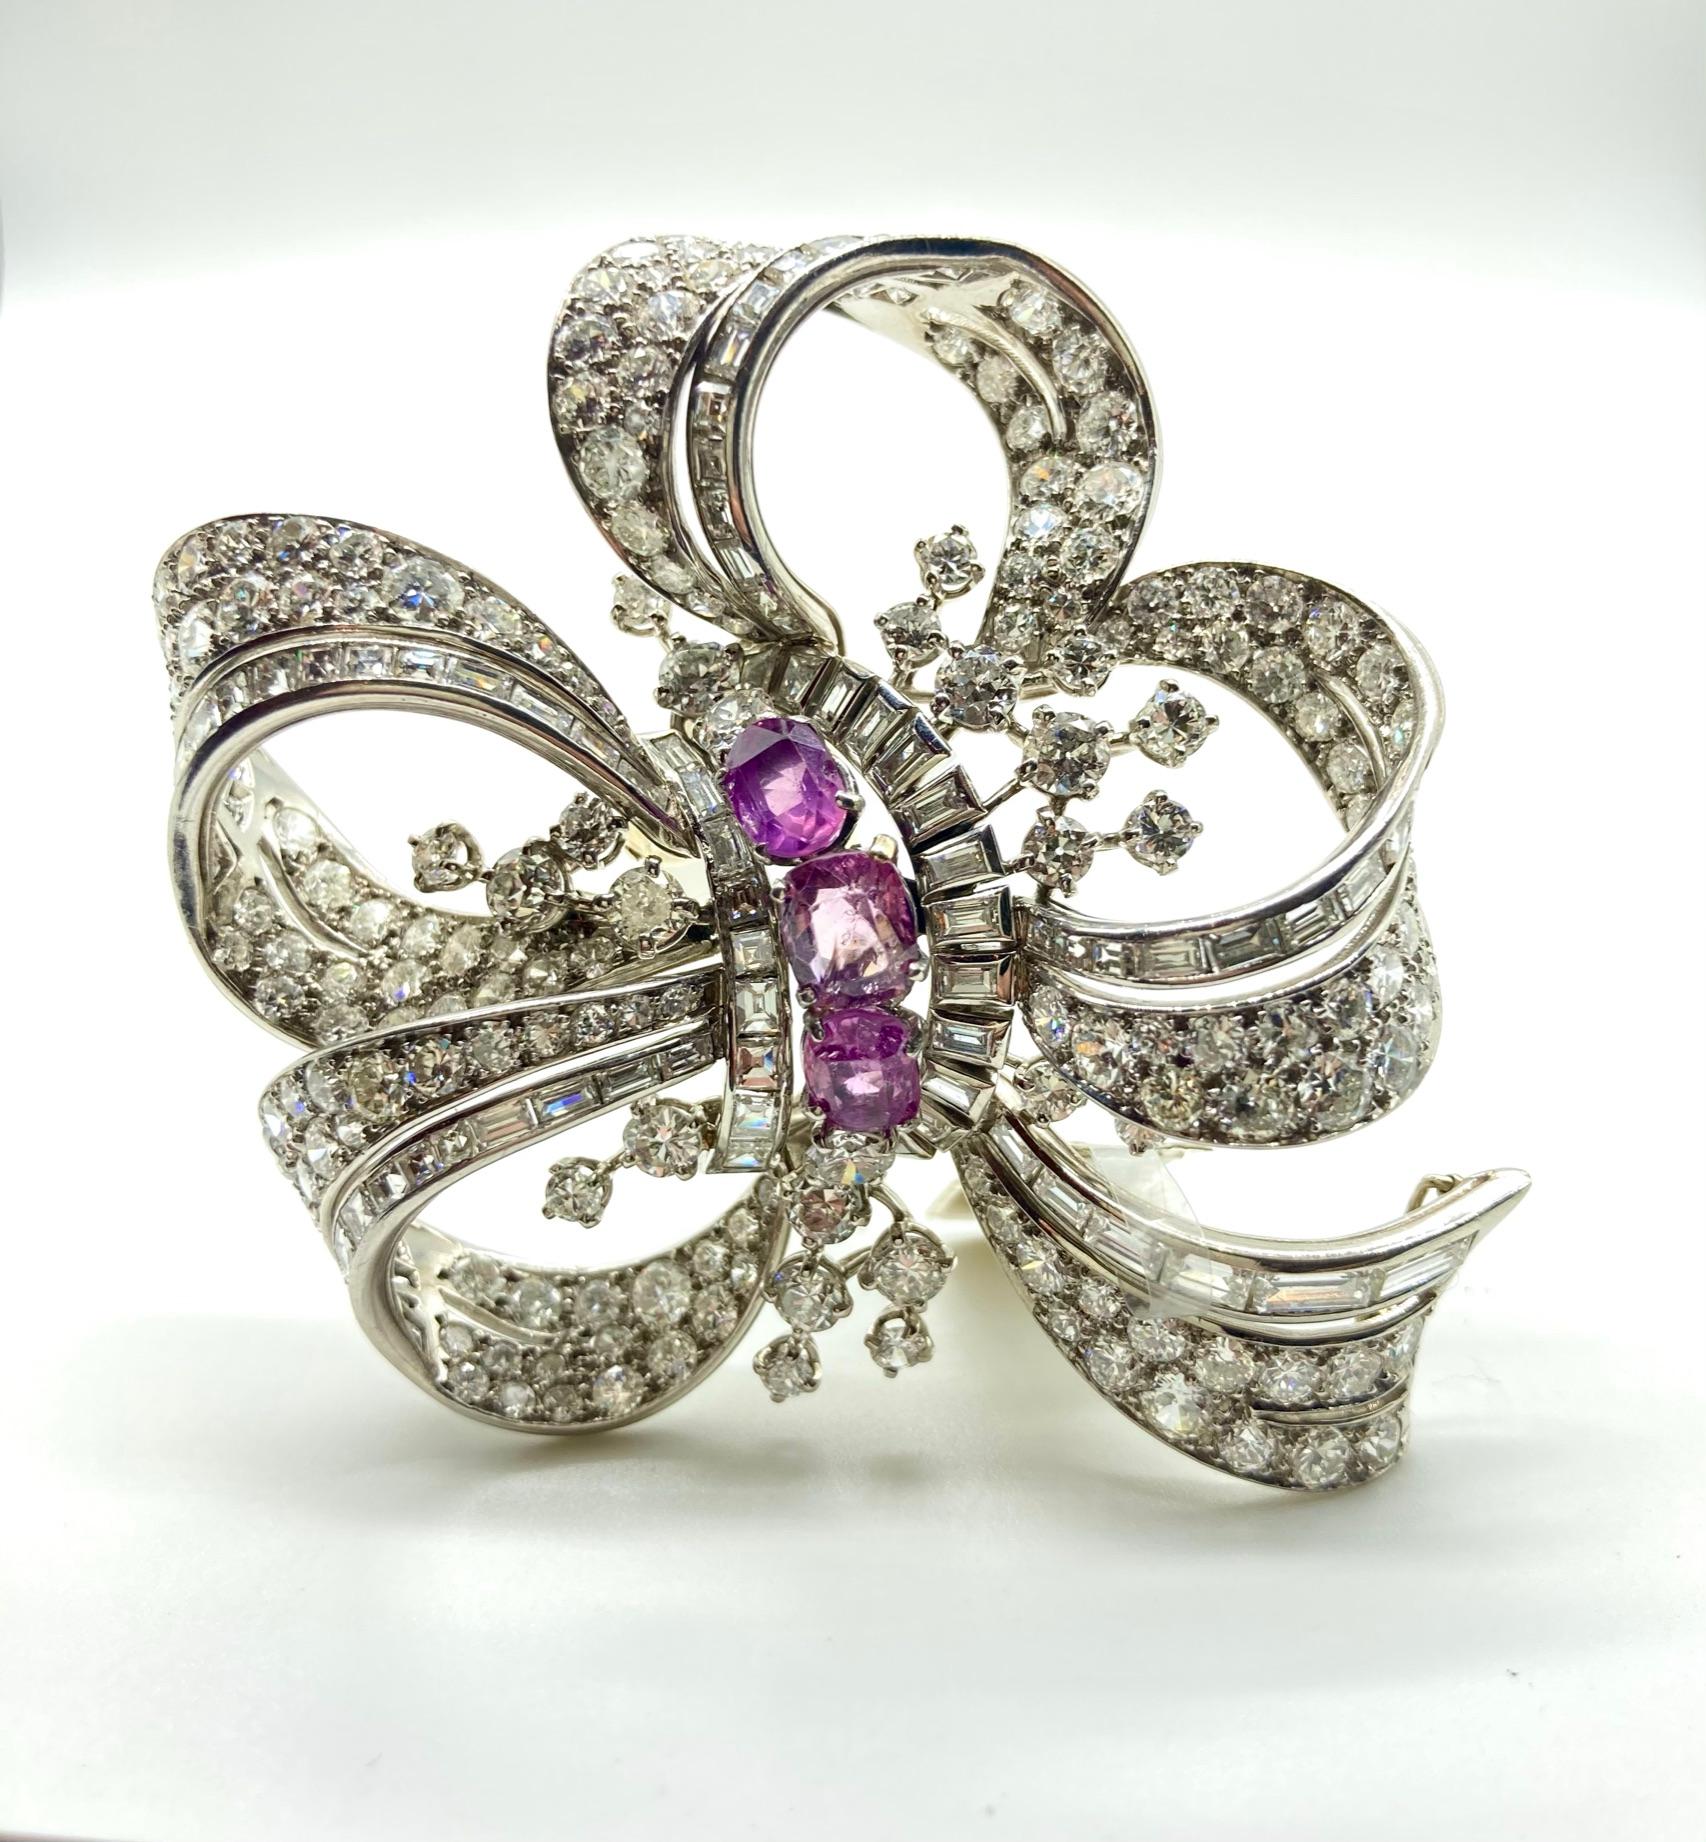 A beautiful retro white gold bow brooch with 4.48 carats of pink sapphires and 23 carats of diamonds by Regner Paris. Made in France, circa 1935.